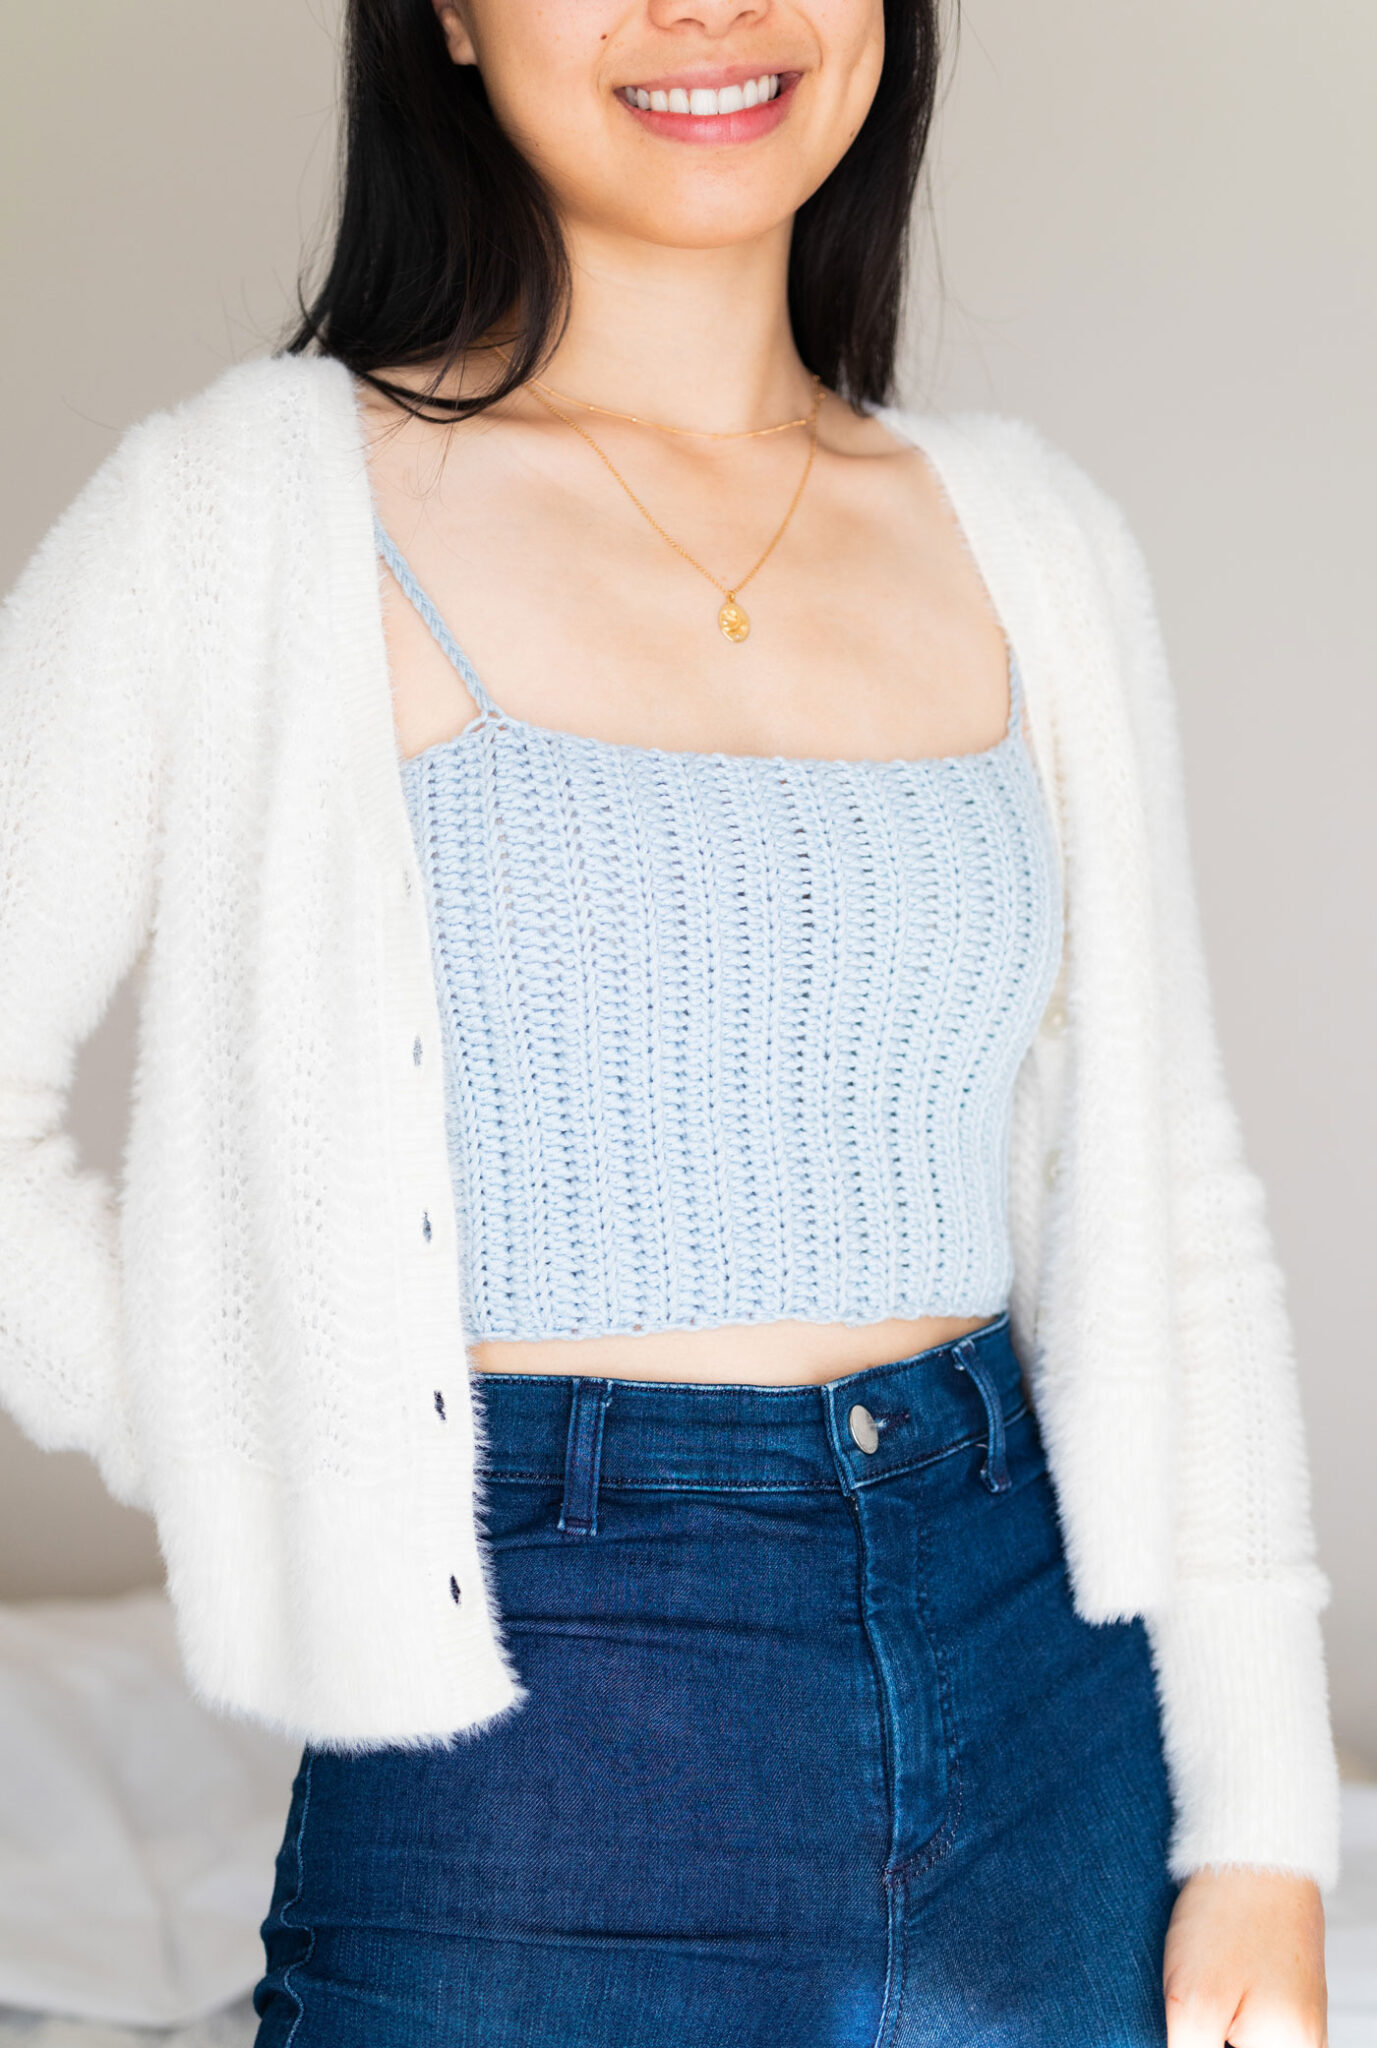 woman wearing baby blue crochet crop top with fuzzy white cardigan free pattern